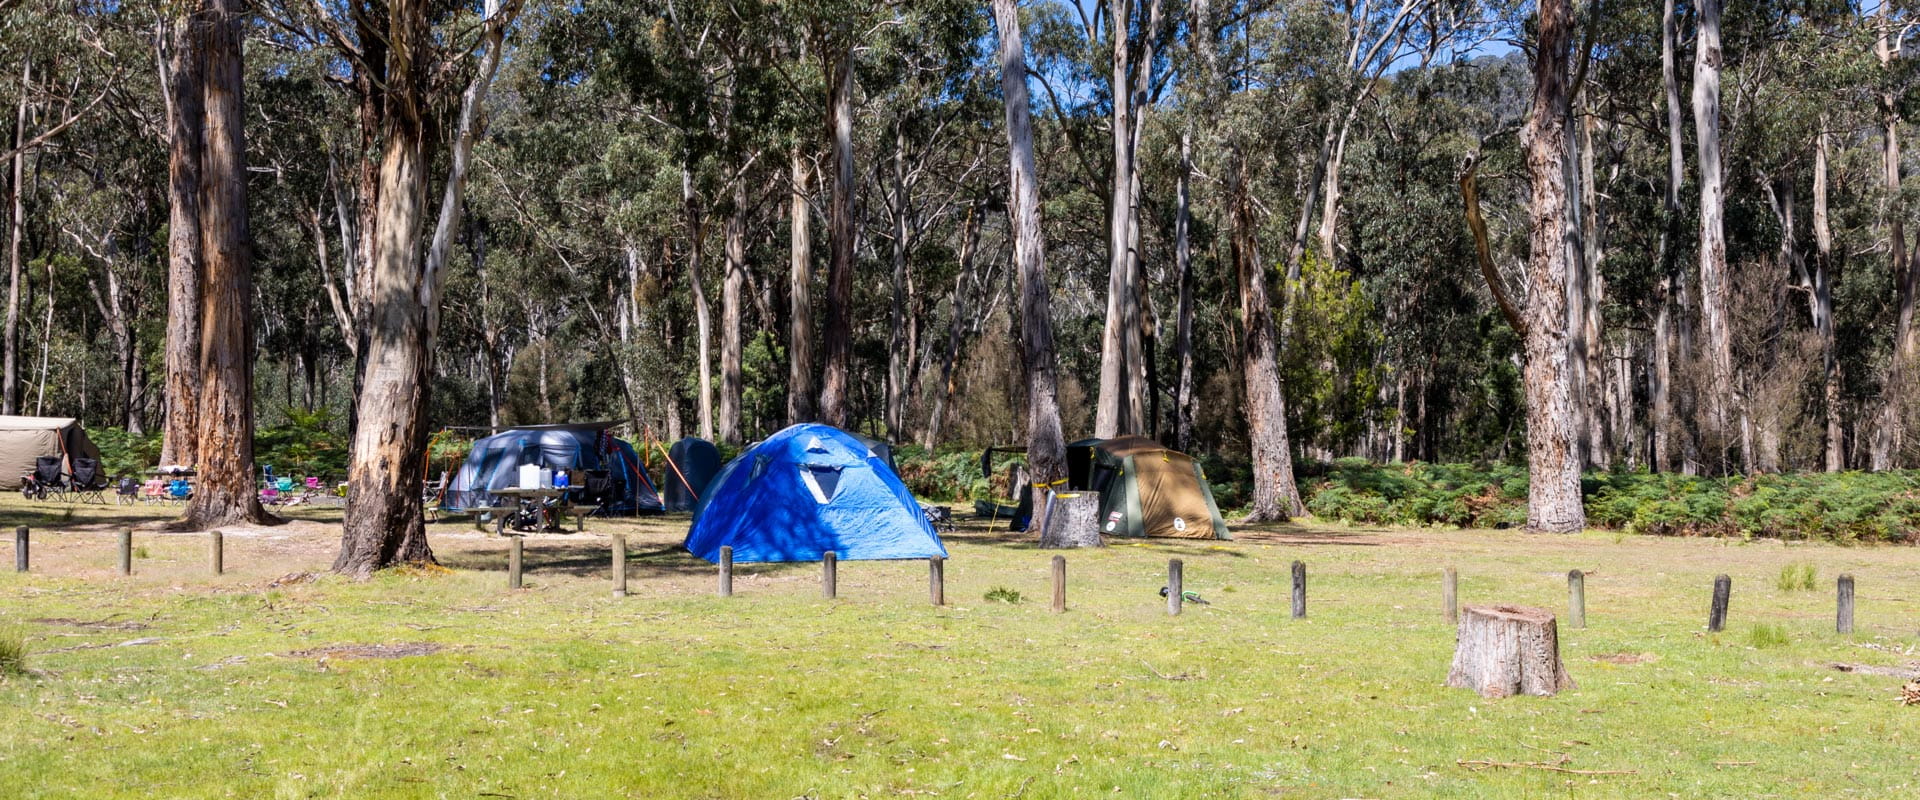 Three large tents pitched in a grassy campground under the shade of large, towering trees overhead.